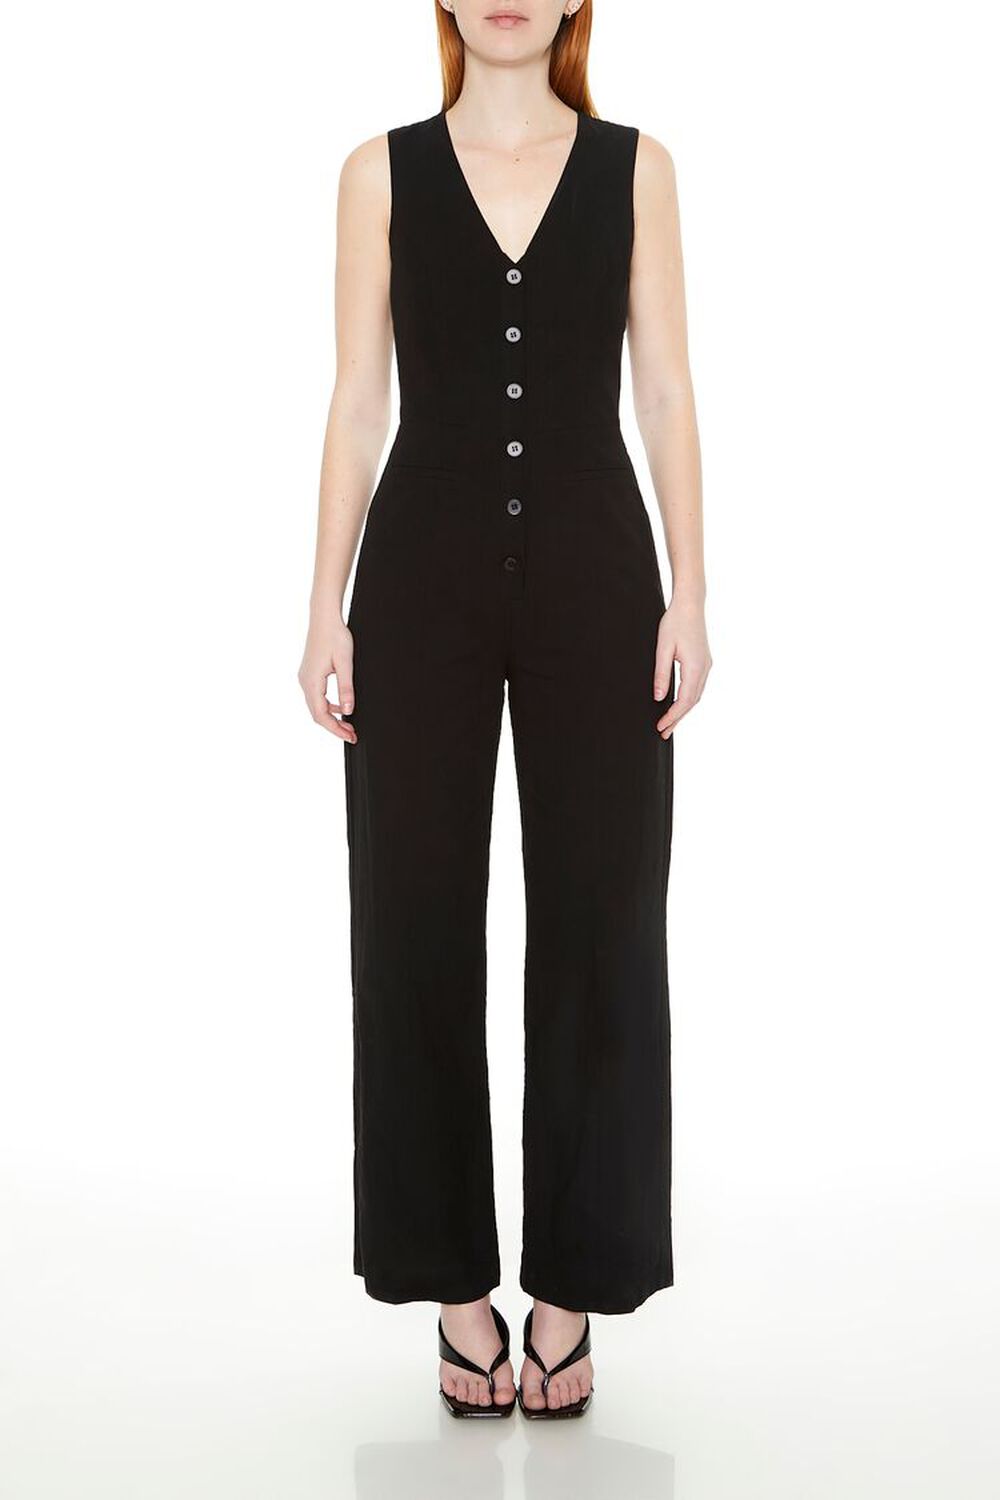 BLACK Sleeveless Button-Front Jumpsuit, image 1